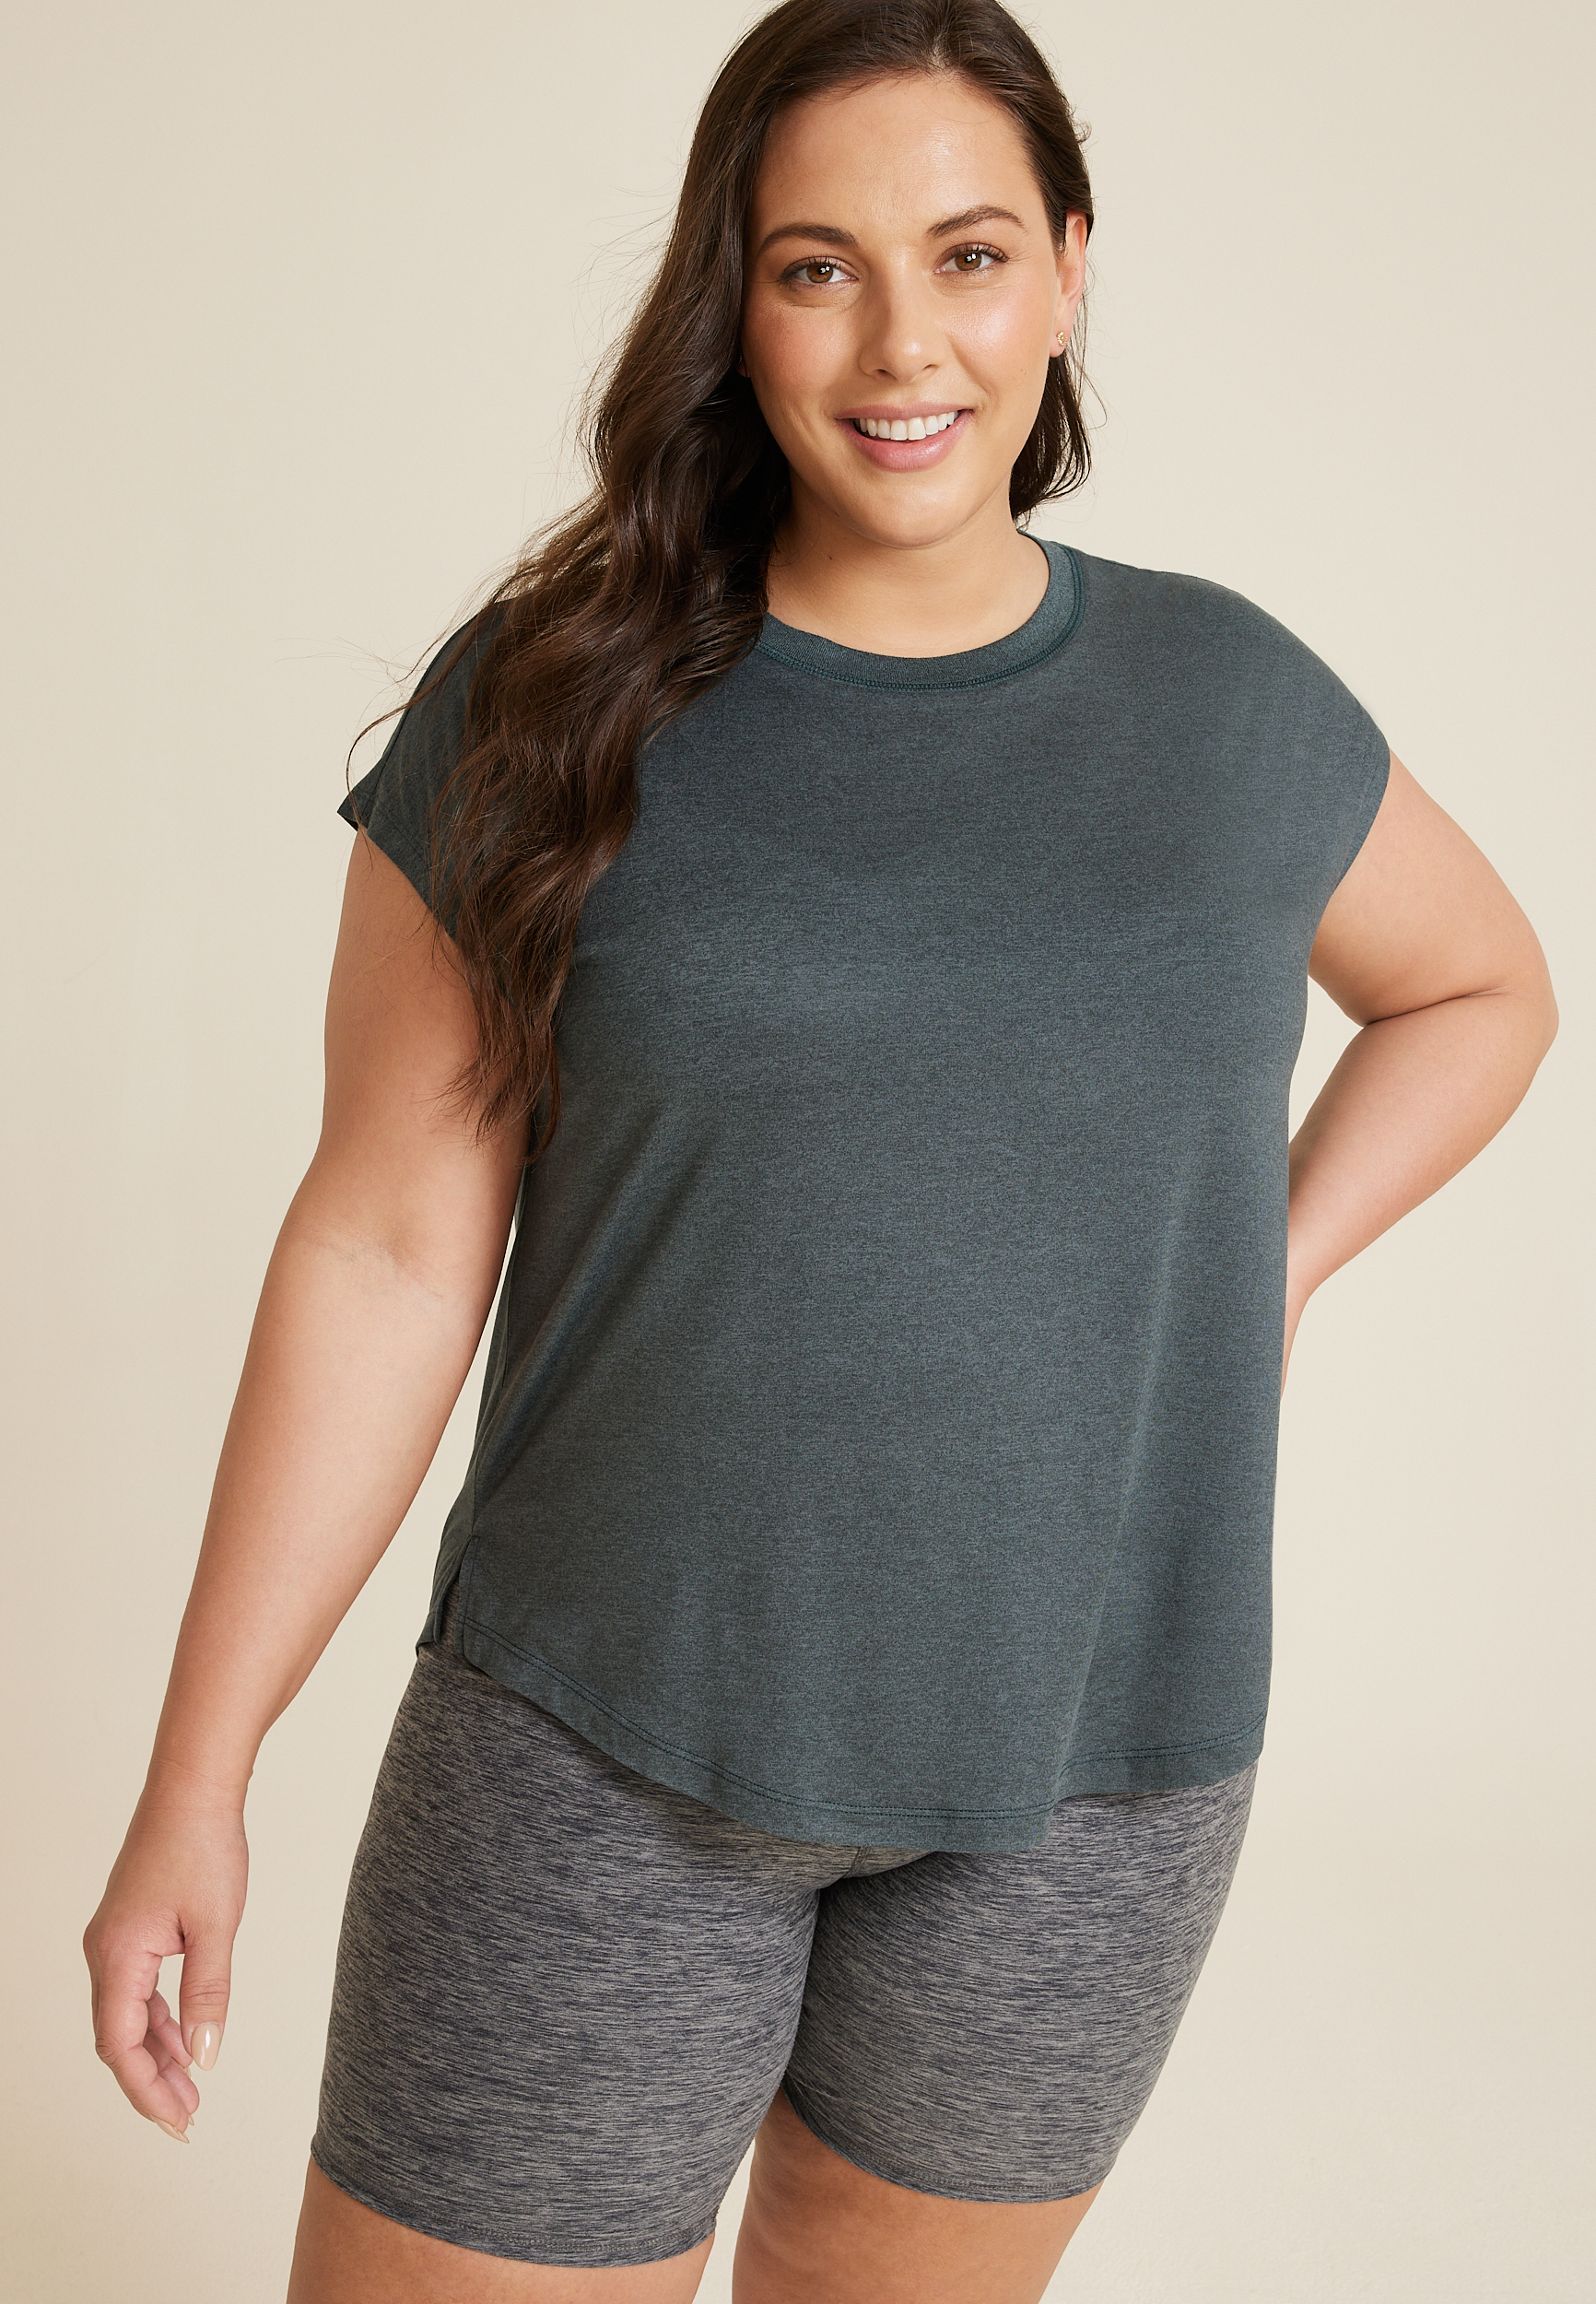 New Arrival Plus Size Tops For Women: Sweaters, Tees & More